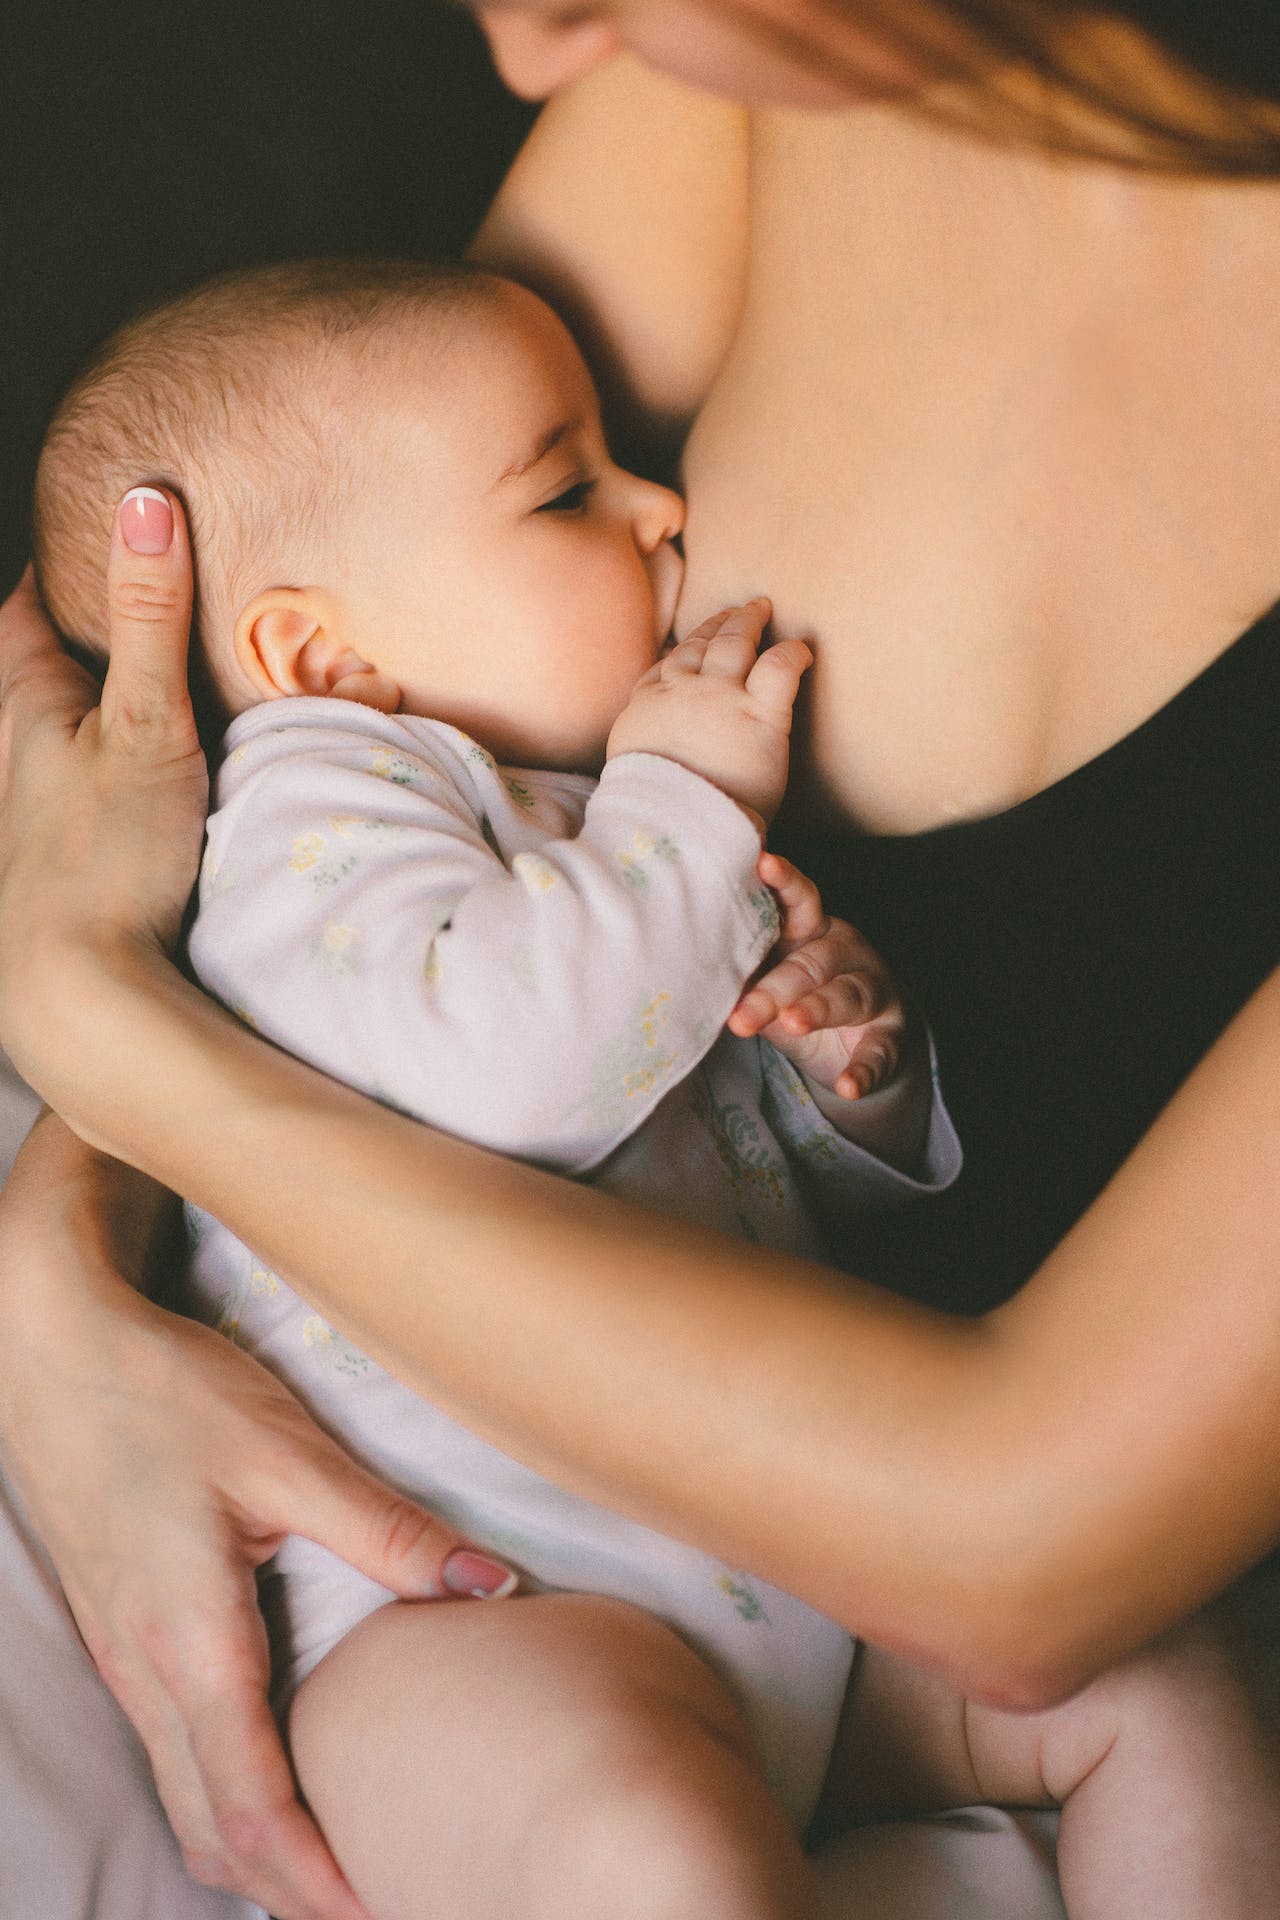 Why Should A New Mother Never Wait to Call a Lactation Expert?